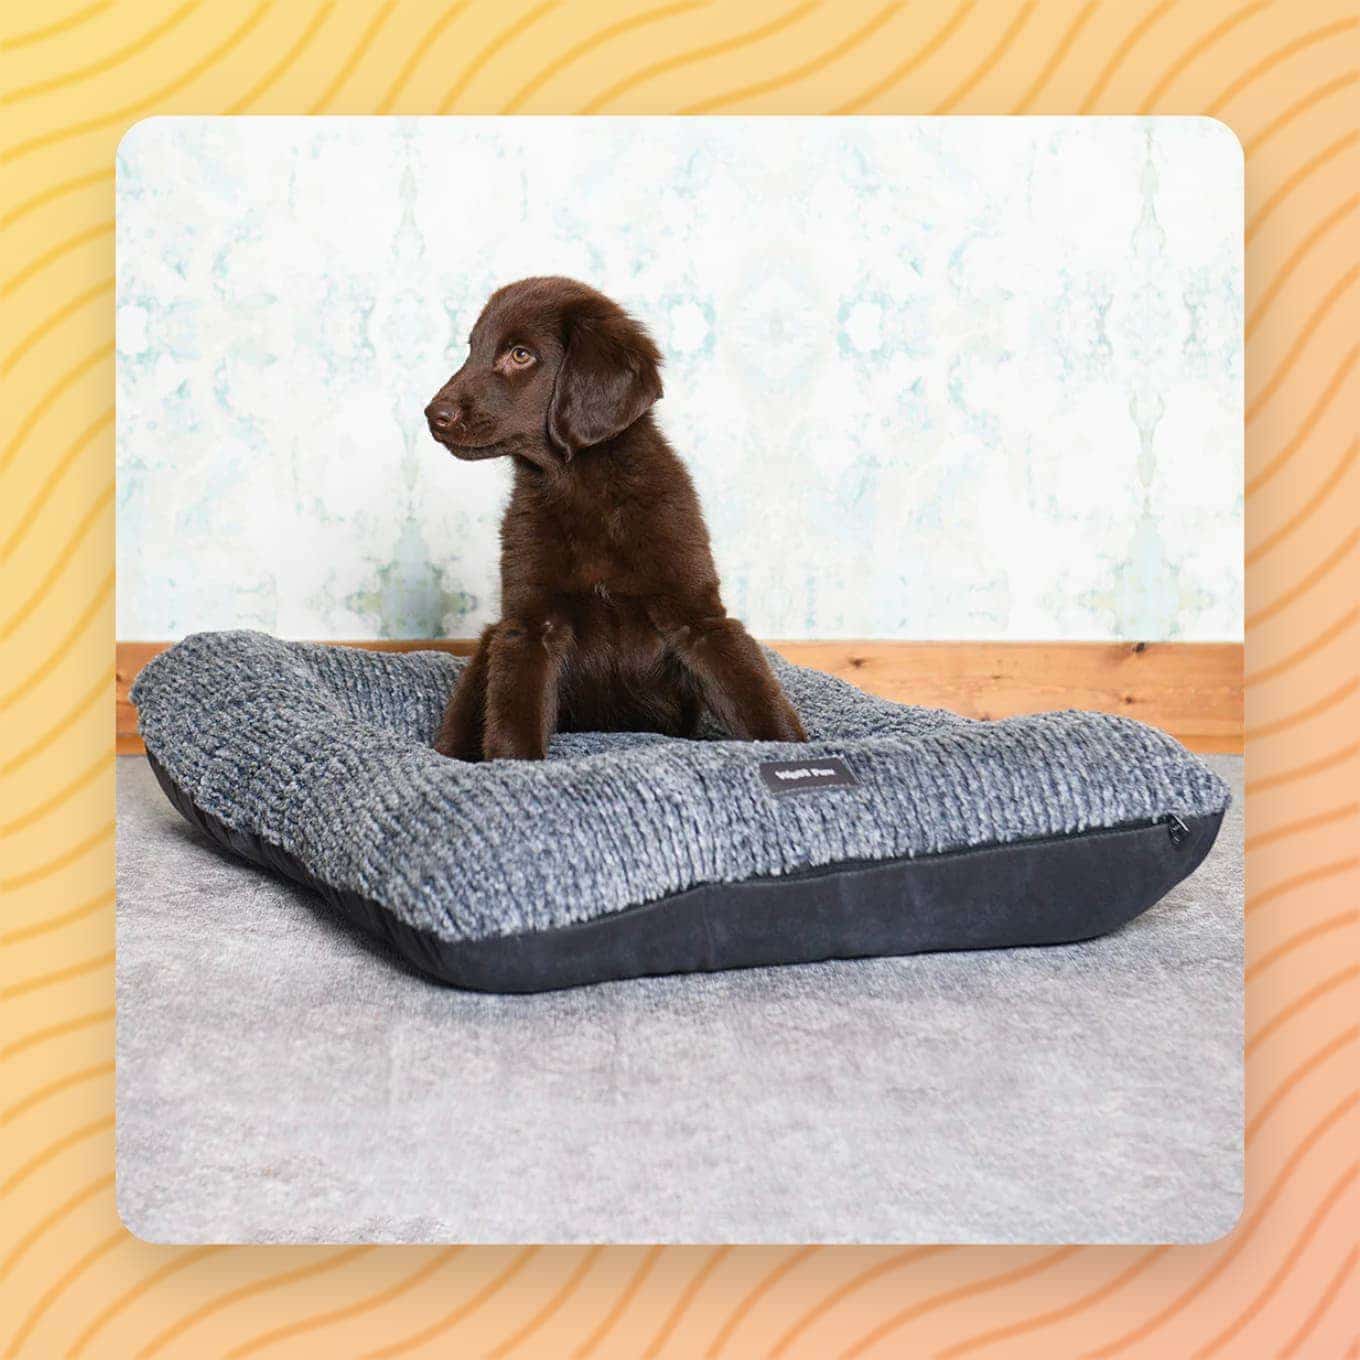 A puppy sitting on a Heyday Dog Bed from West Paw